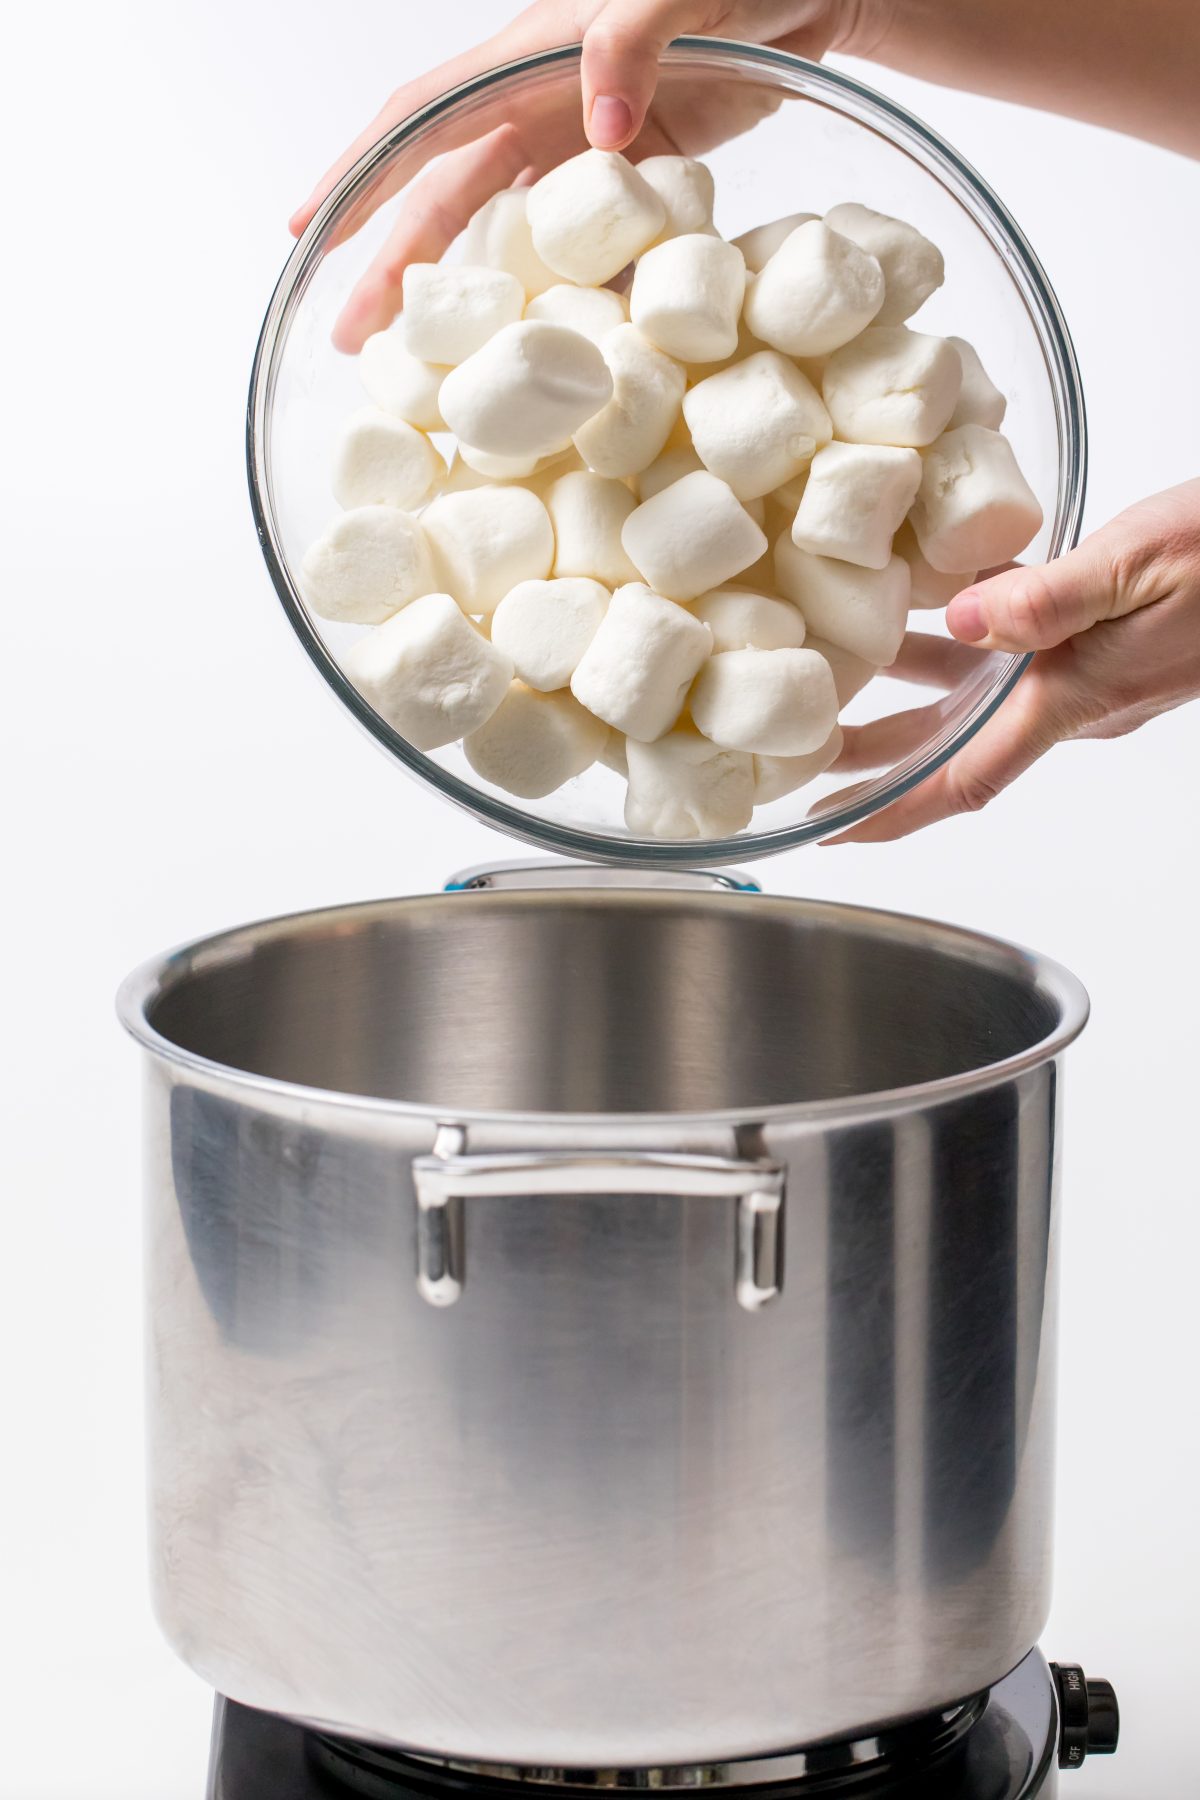 Melt the coconut oil and marshmallows